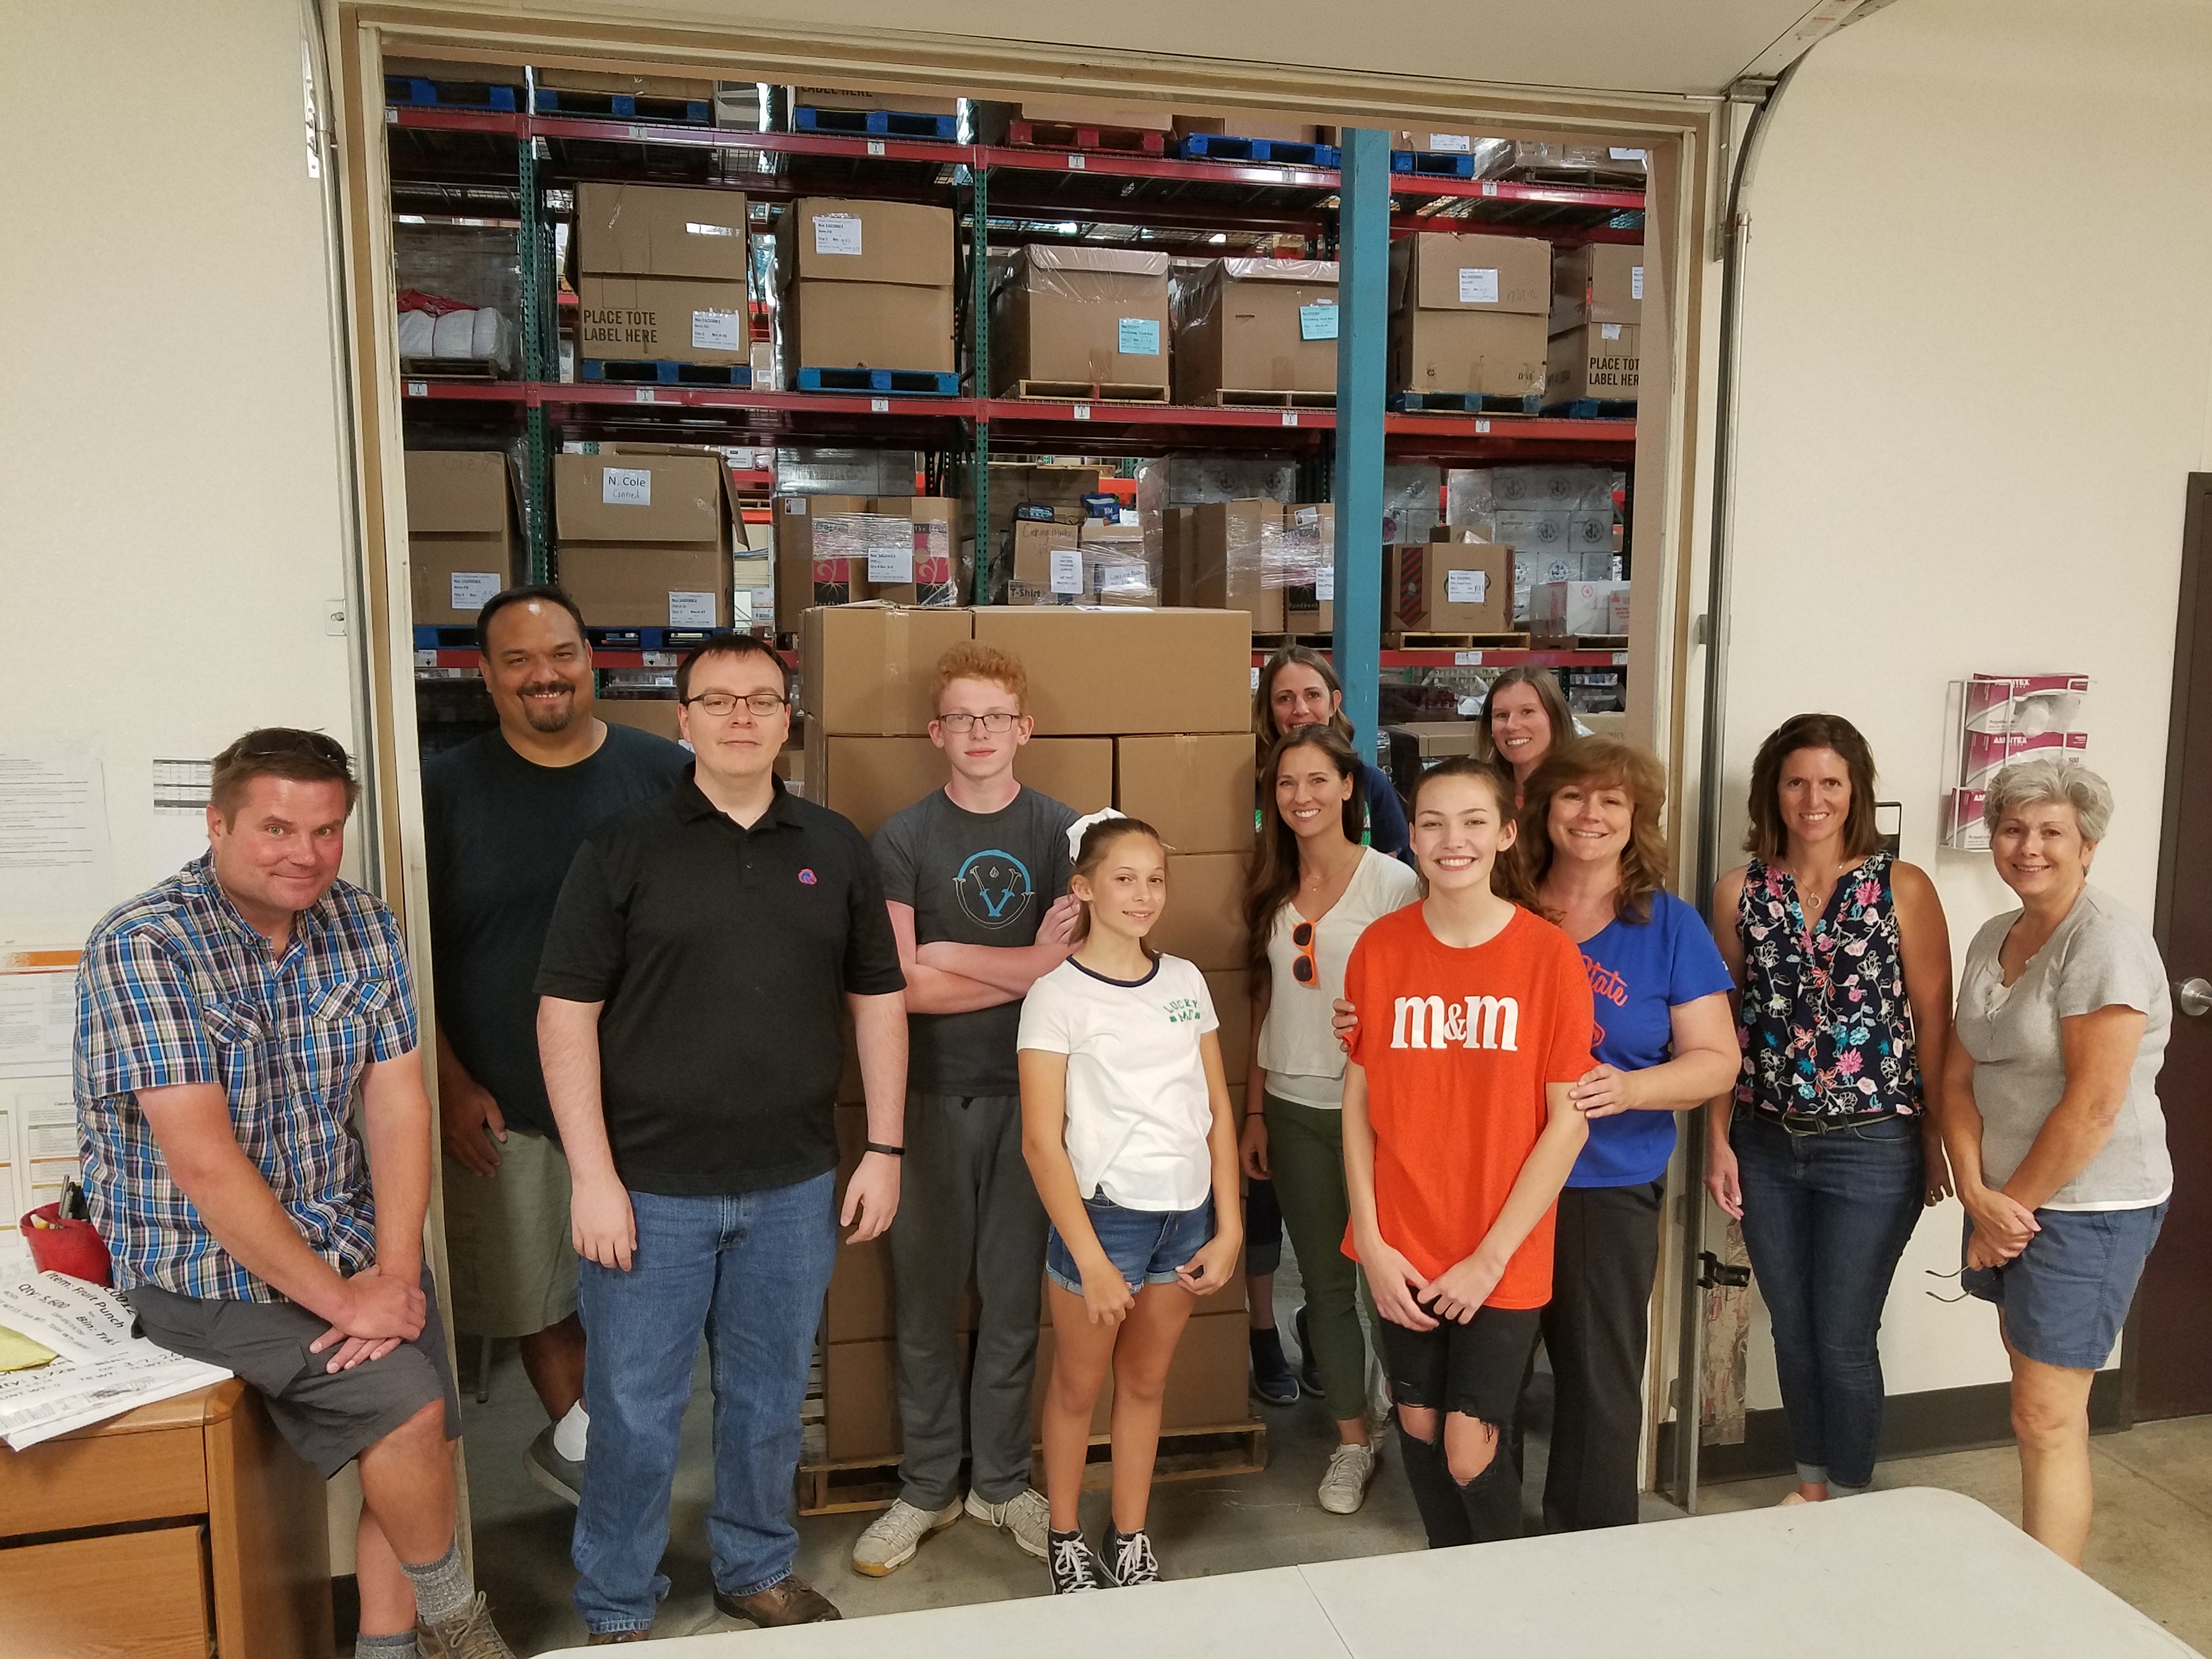 Boise State employees pose at the Idaho Food Bank while volunteering.